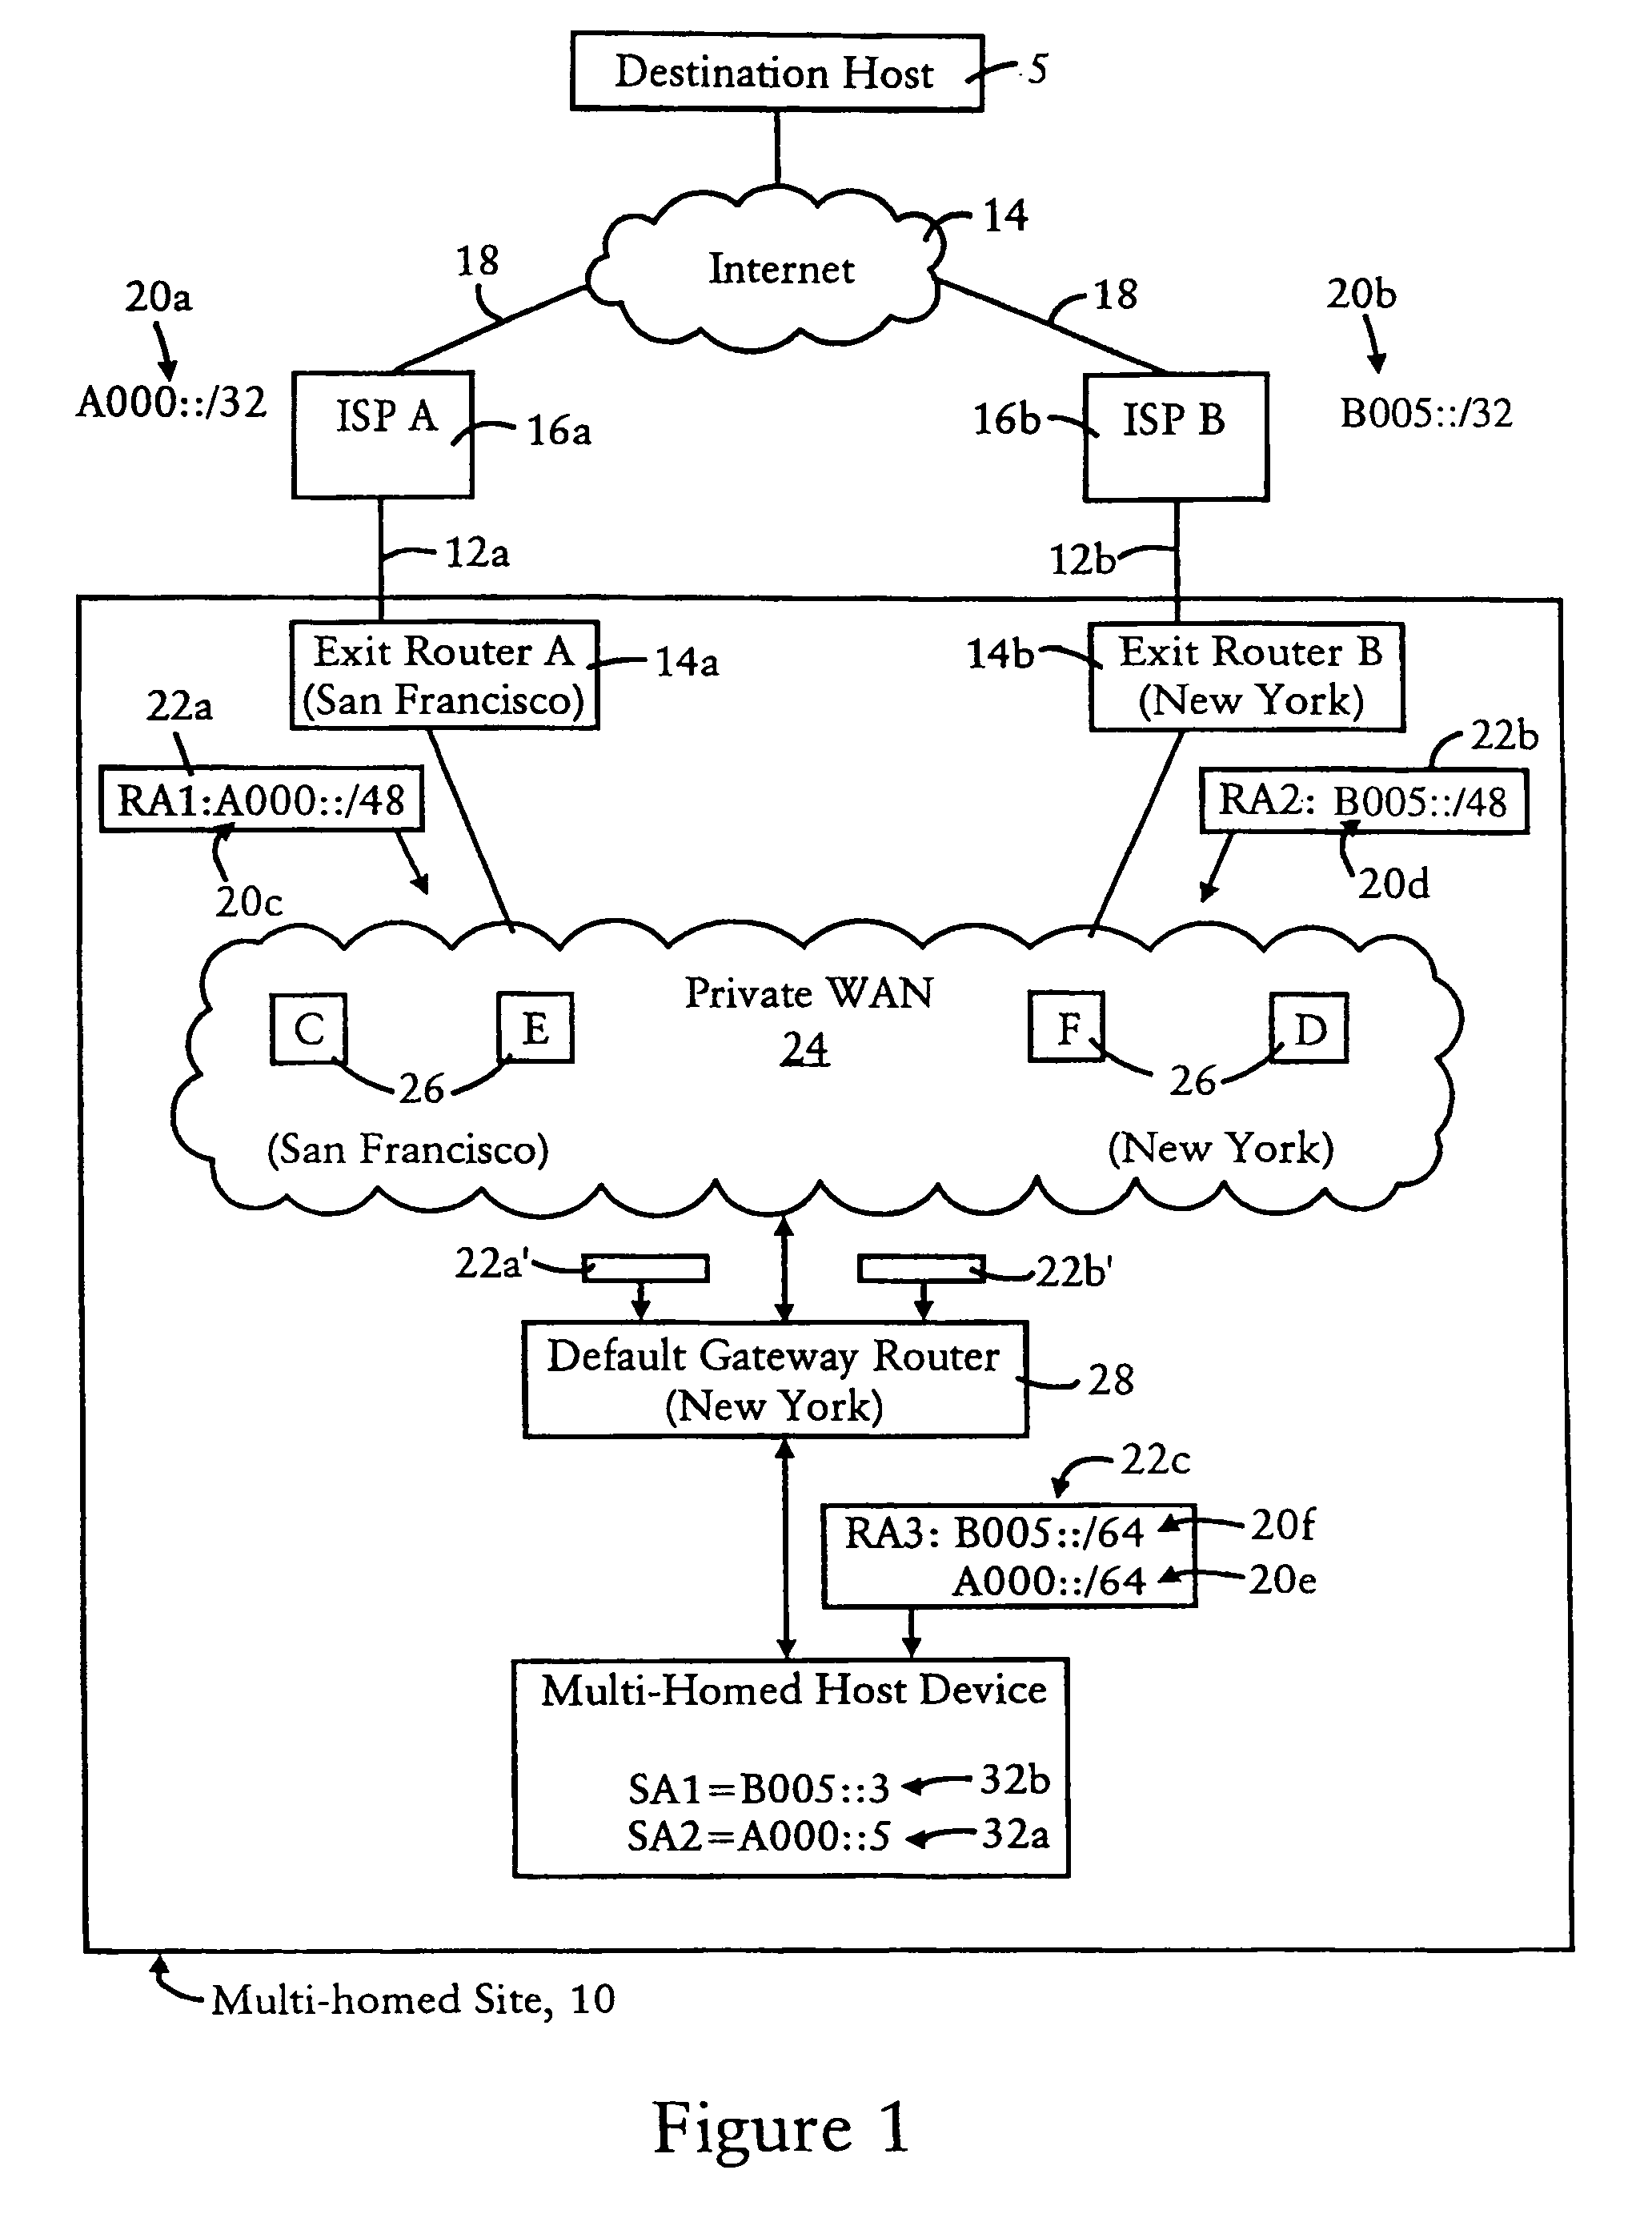 Default gateway router supplying IP address prefixes ordered for source address selection by host device